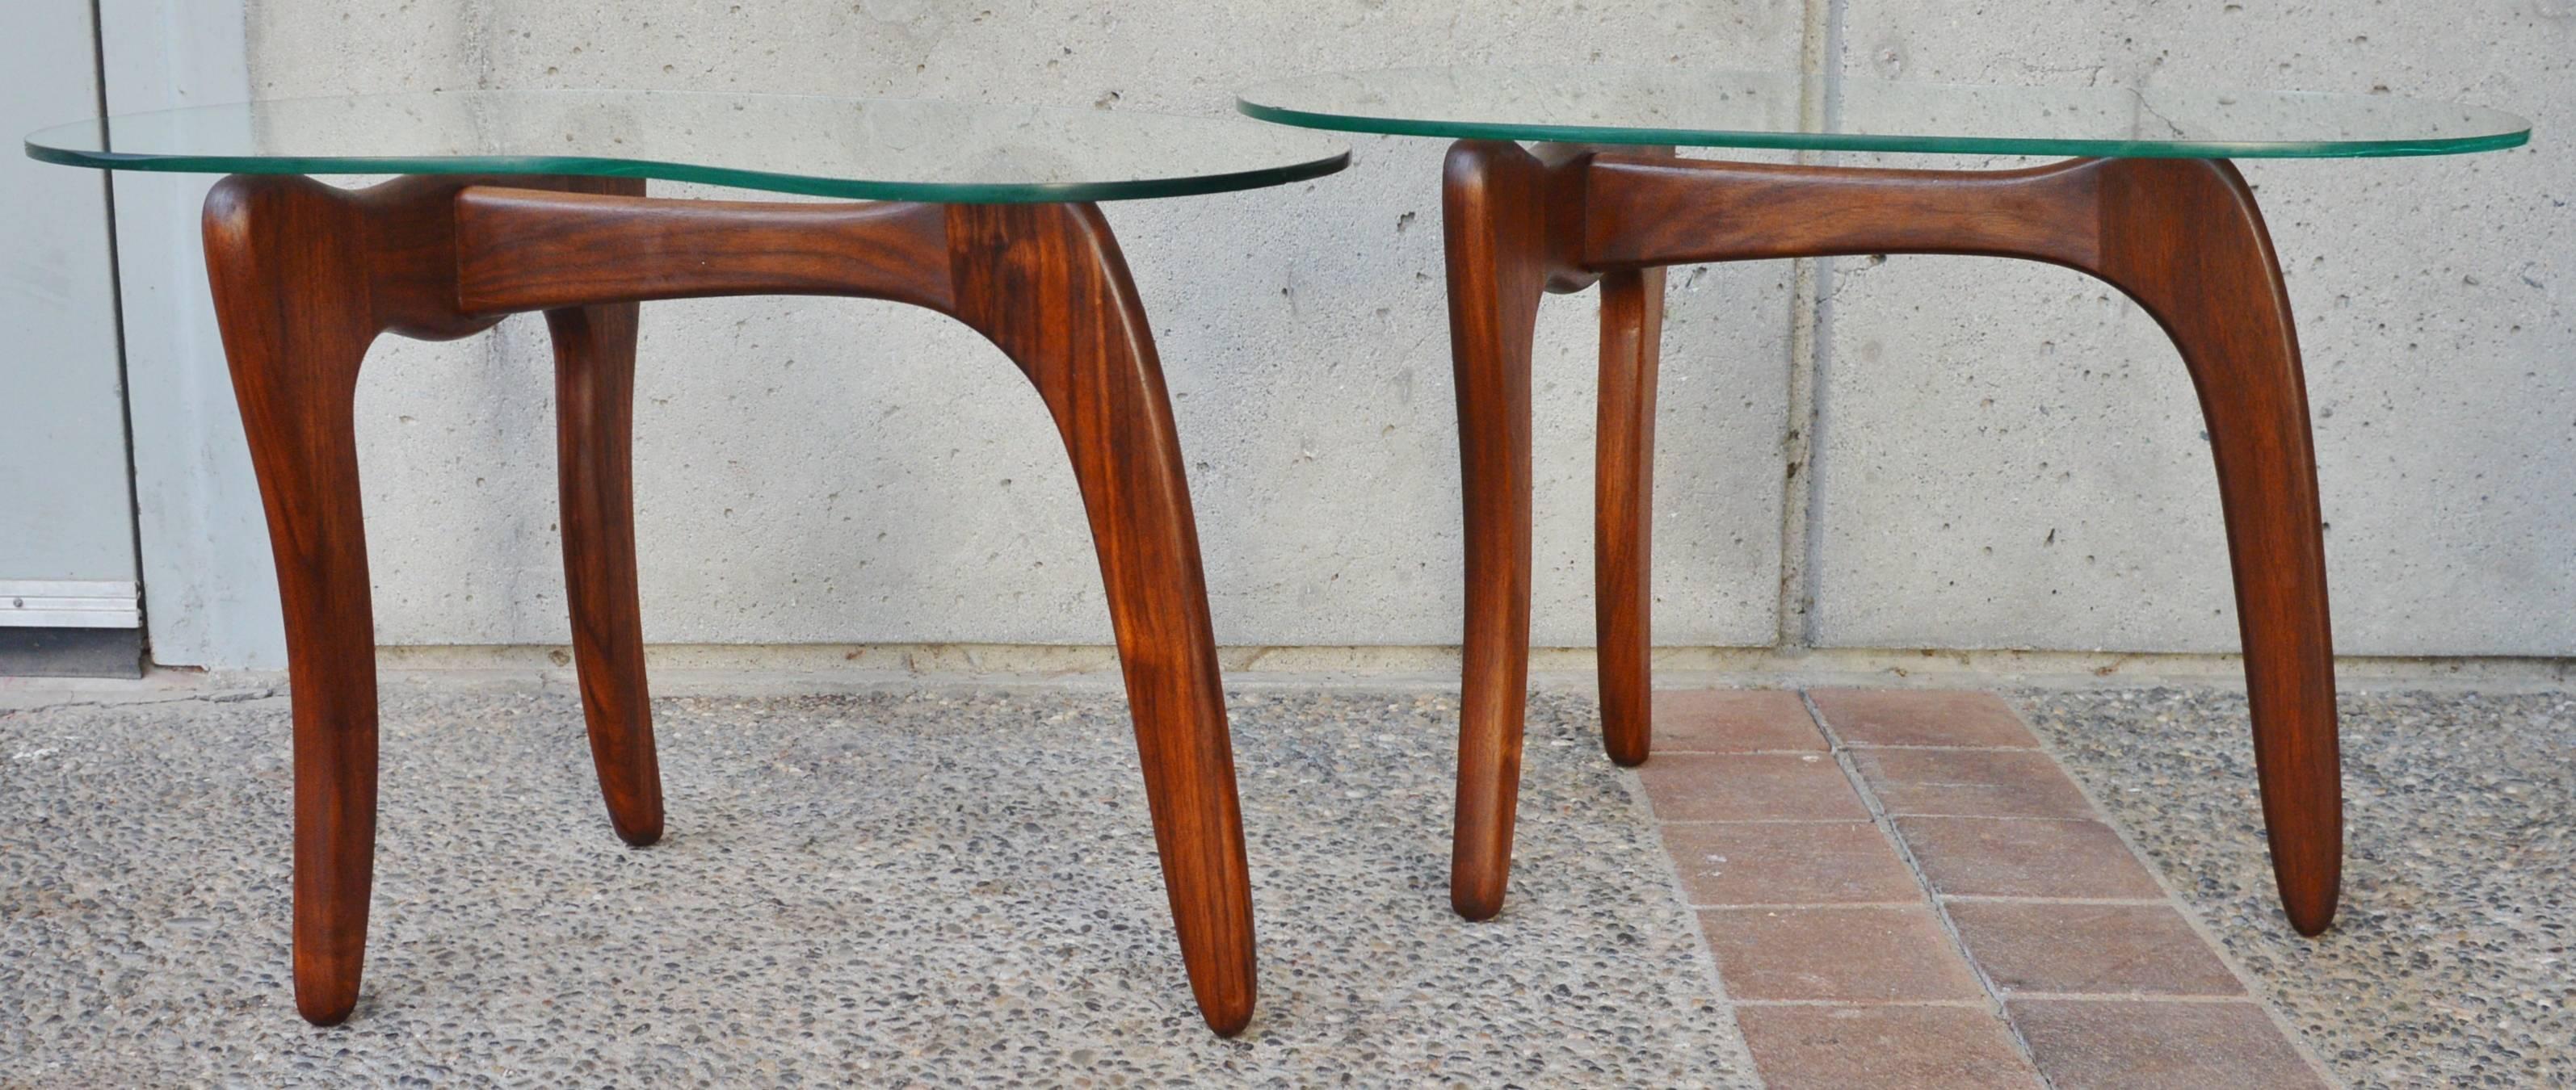 Pair of Adrian Pearsall Solid Walnut Side Tables, Kidney Shape Glass Tops 2